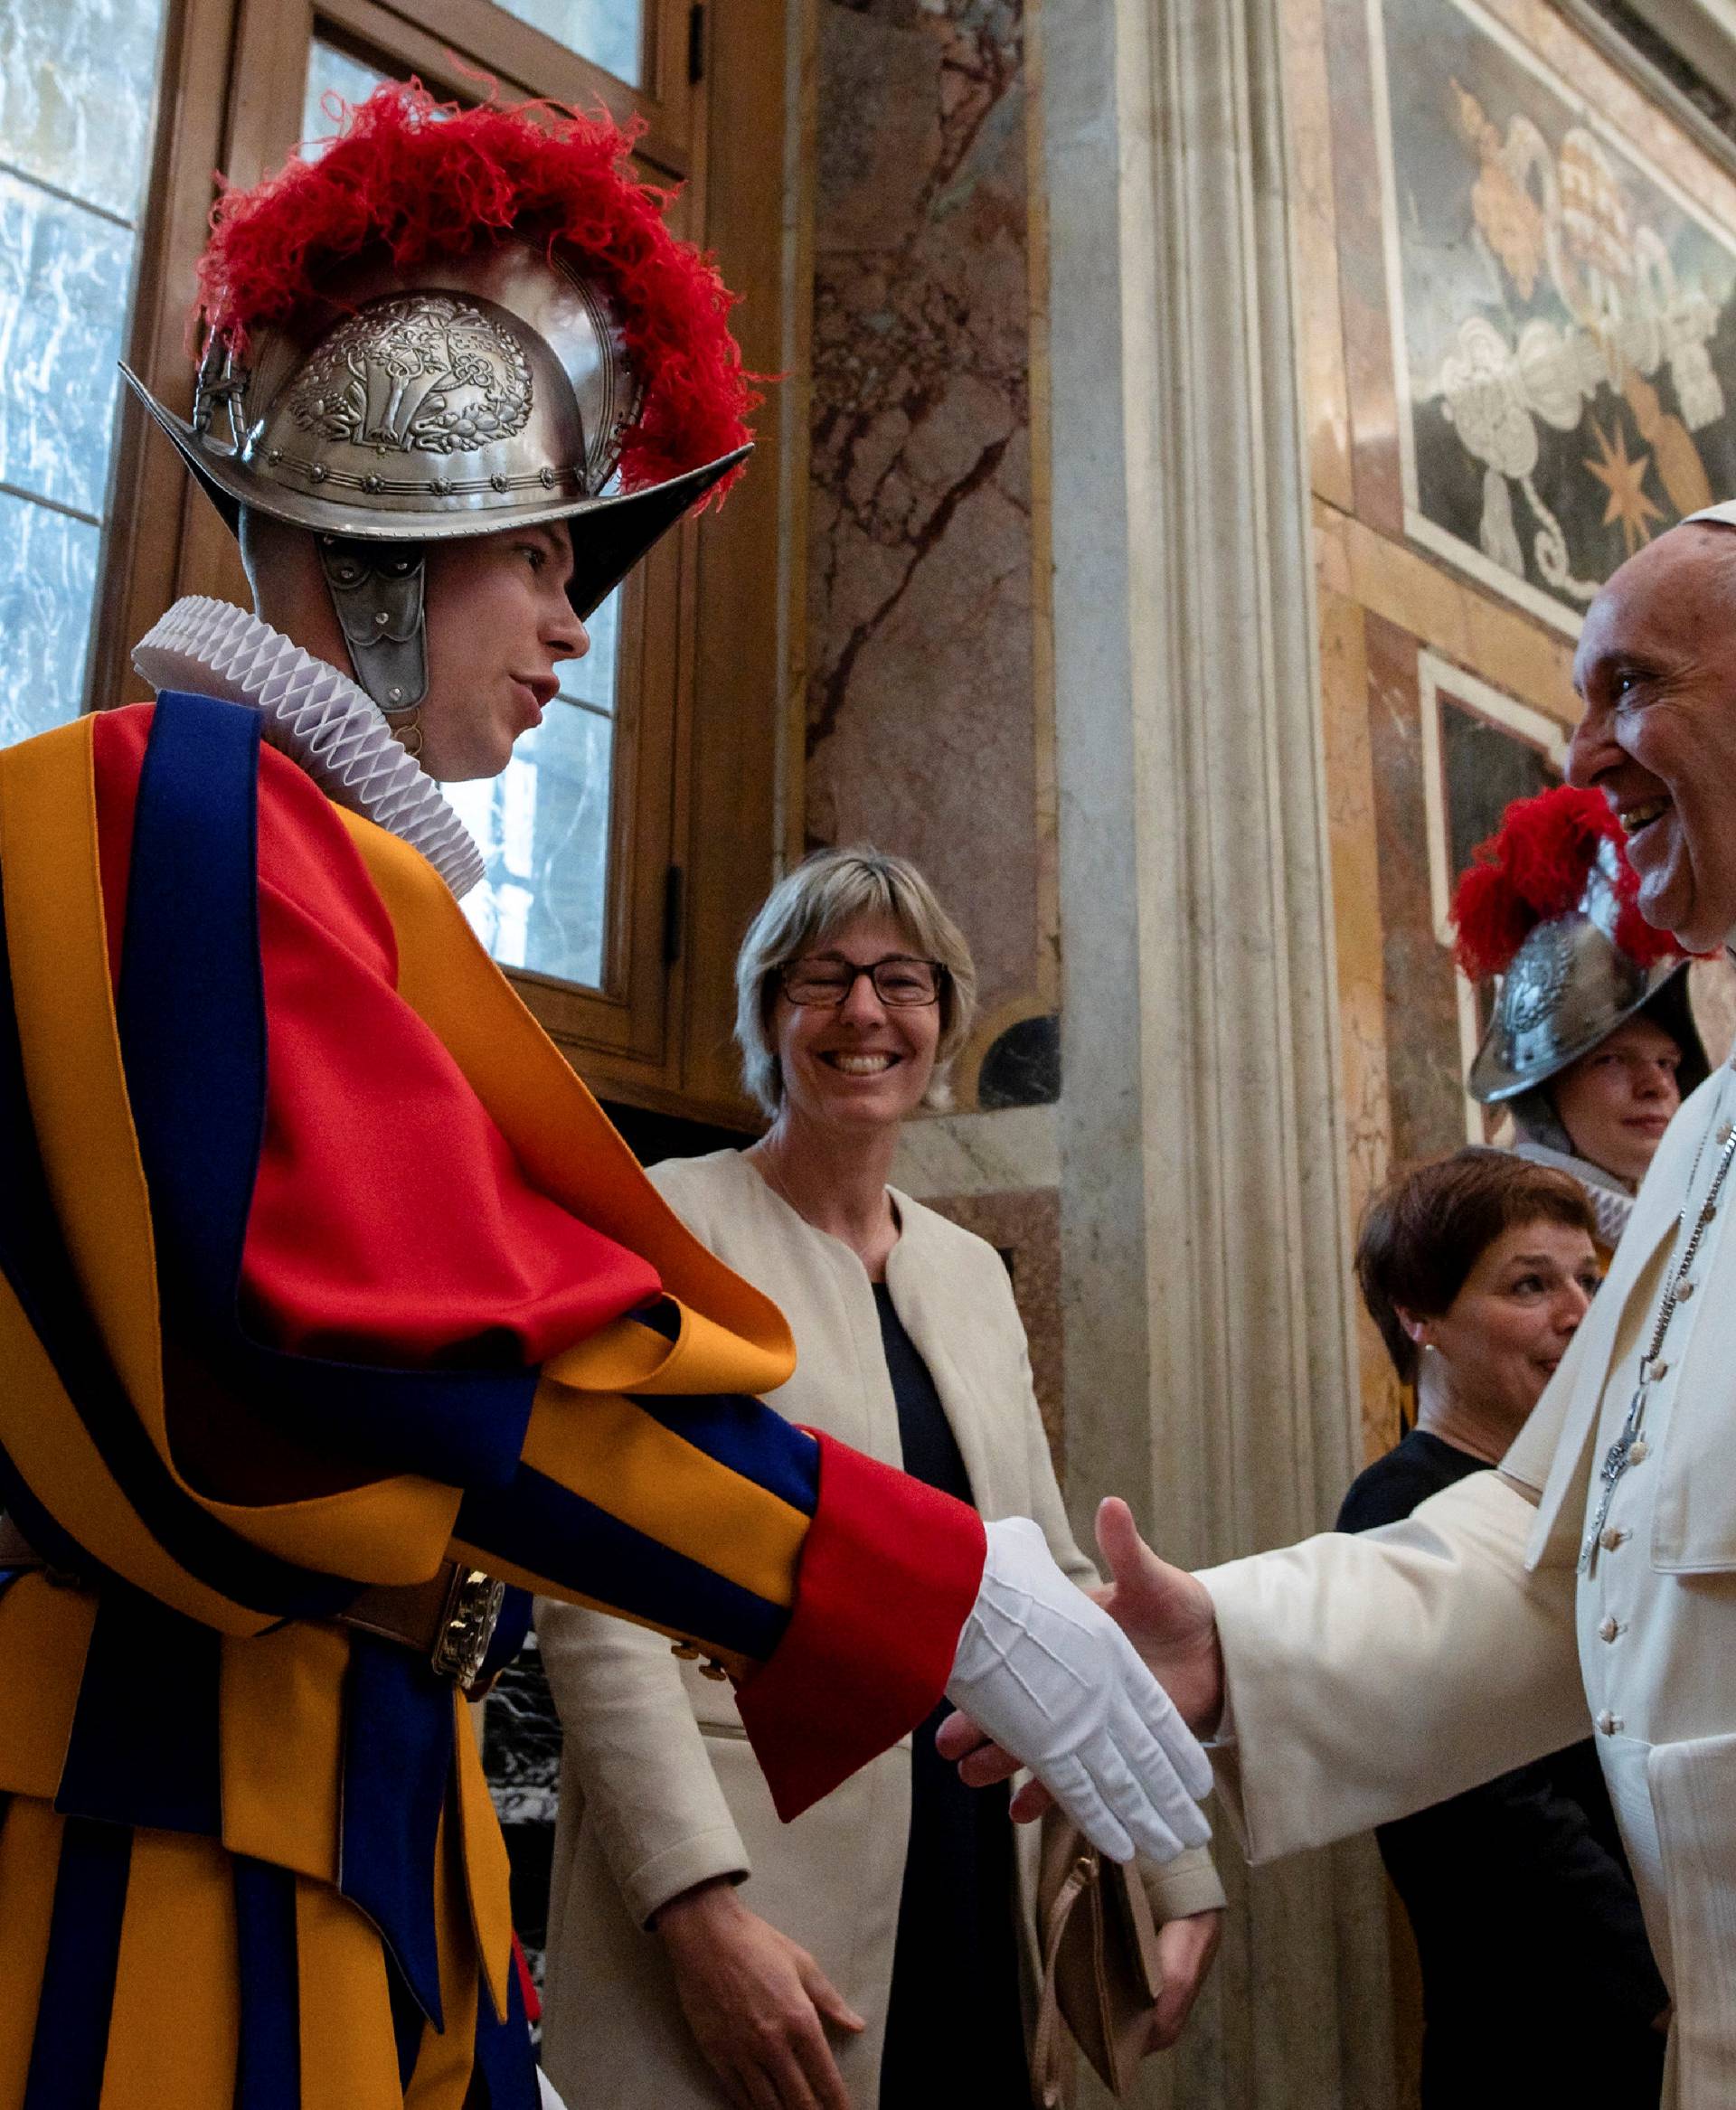 Pope Francis shakes hands with a Swiss guard the day ahead of their swearing-in ceremony at the Vatican